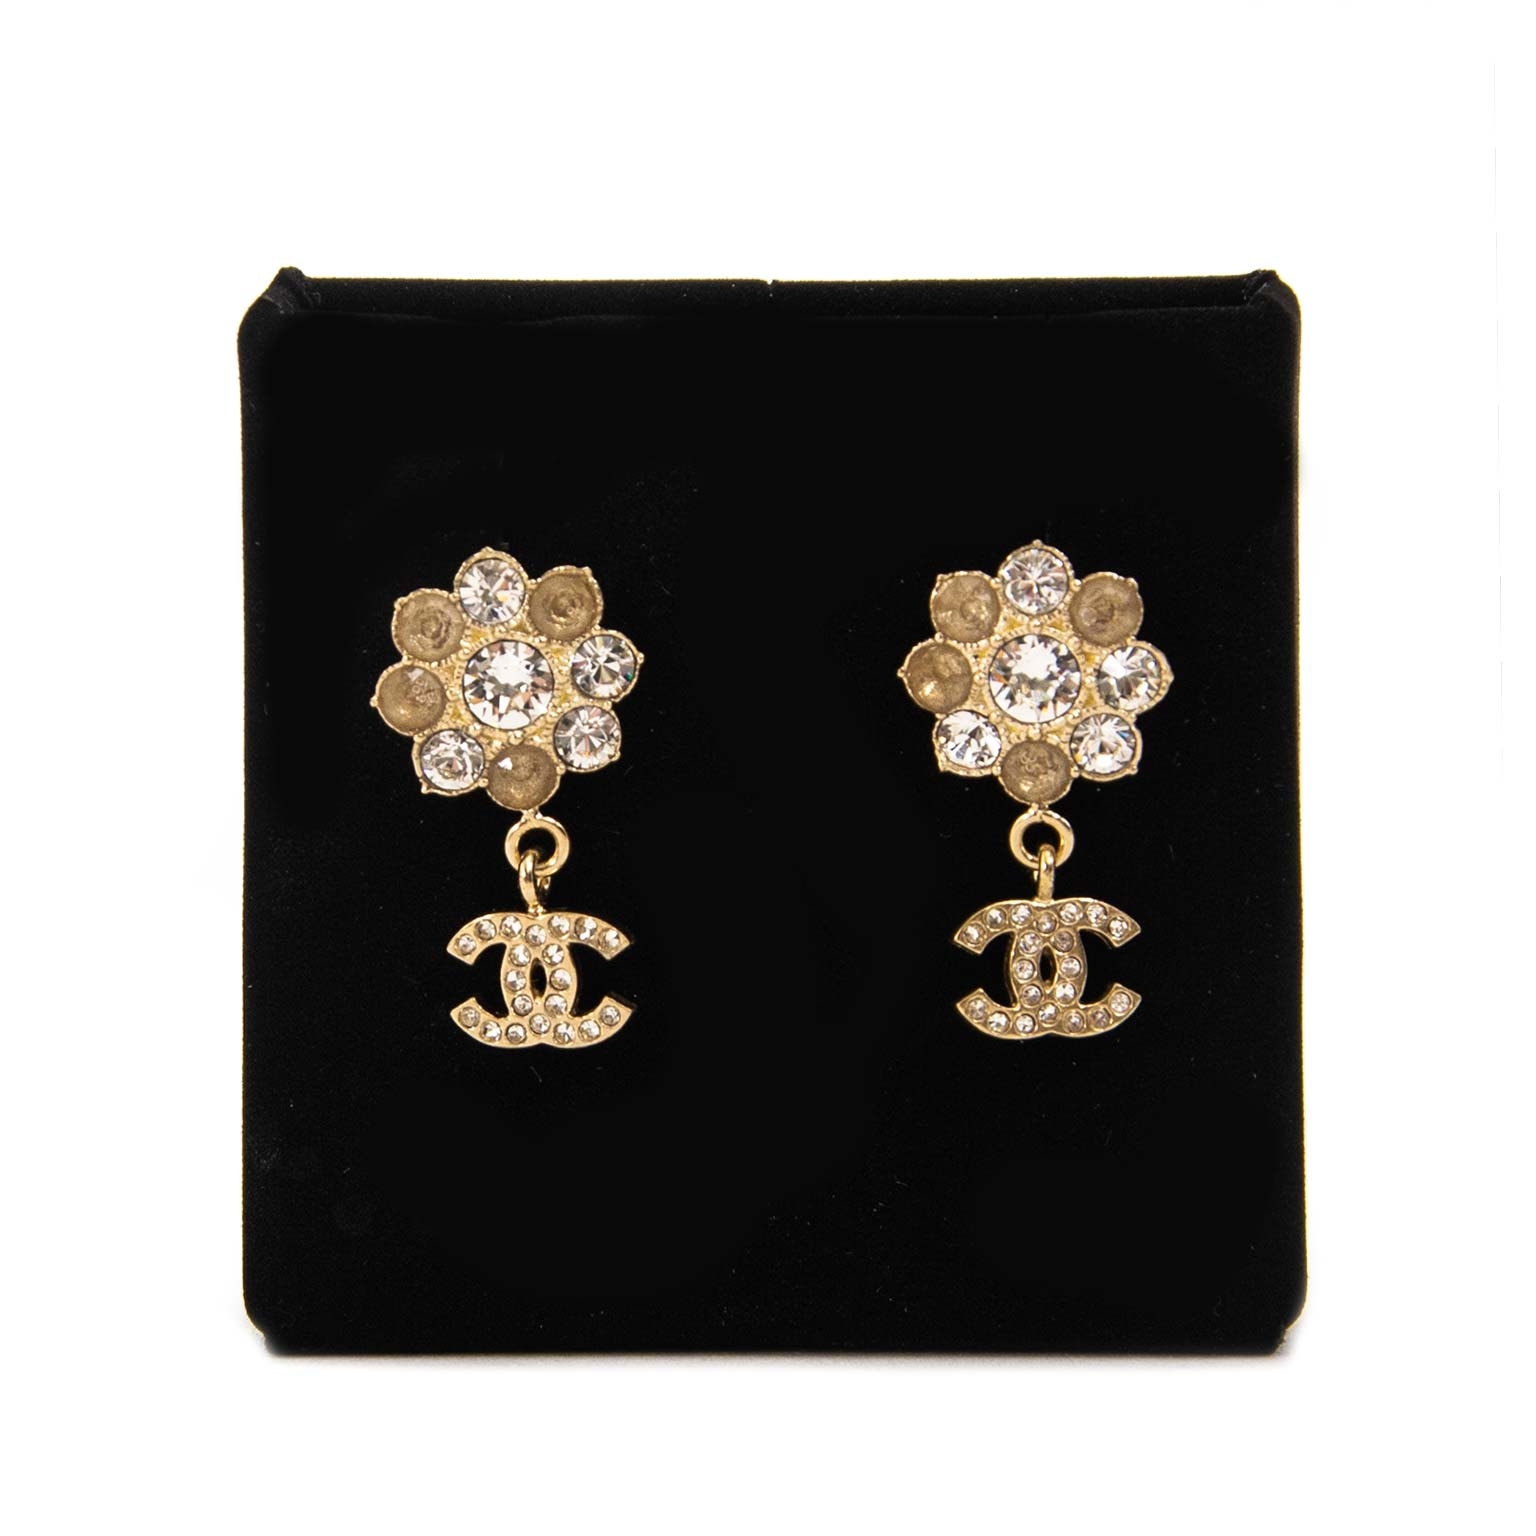 SOLD] FOR SALE: DOUBLE C CLASSIC CHANEL EARRINGS [SILVER]